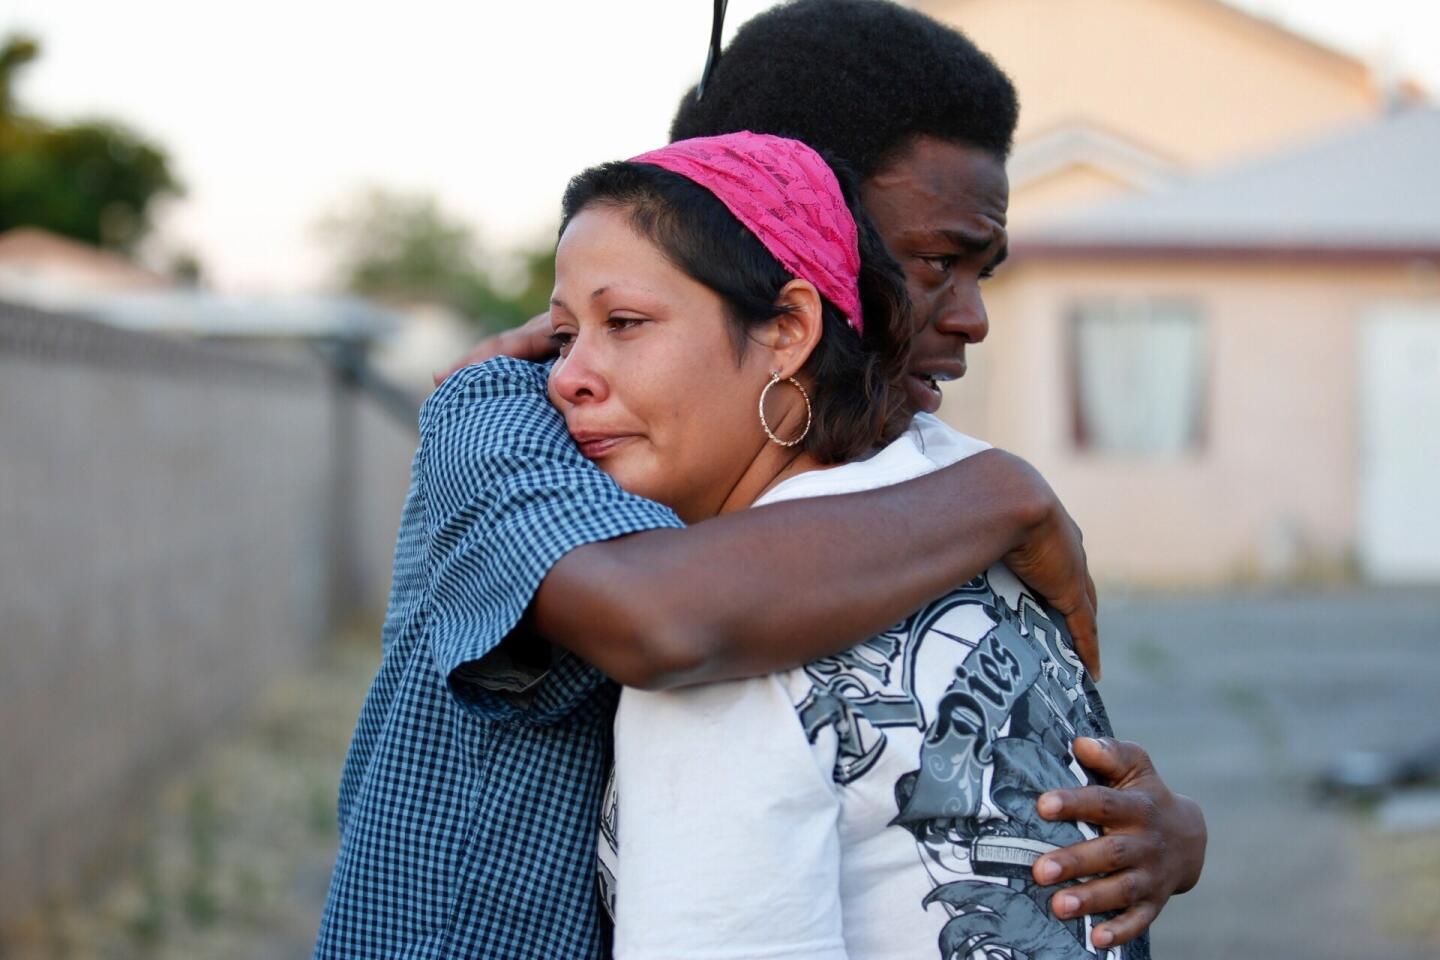 Roberta Alcantar, mother of the victim, hugs her son's friend Miles Mooreand at a candlelight vigil for teenager Armando Garcia-Muro in Palmdale.